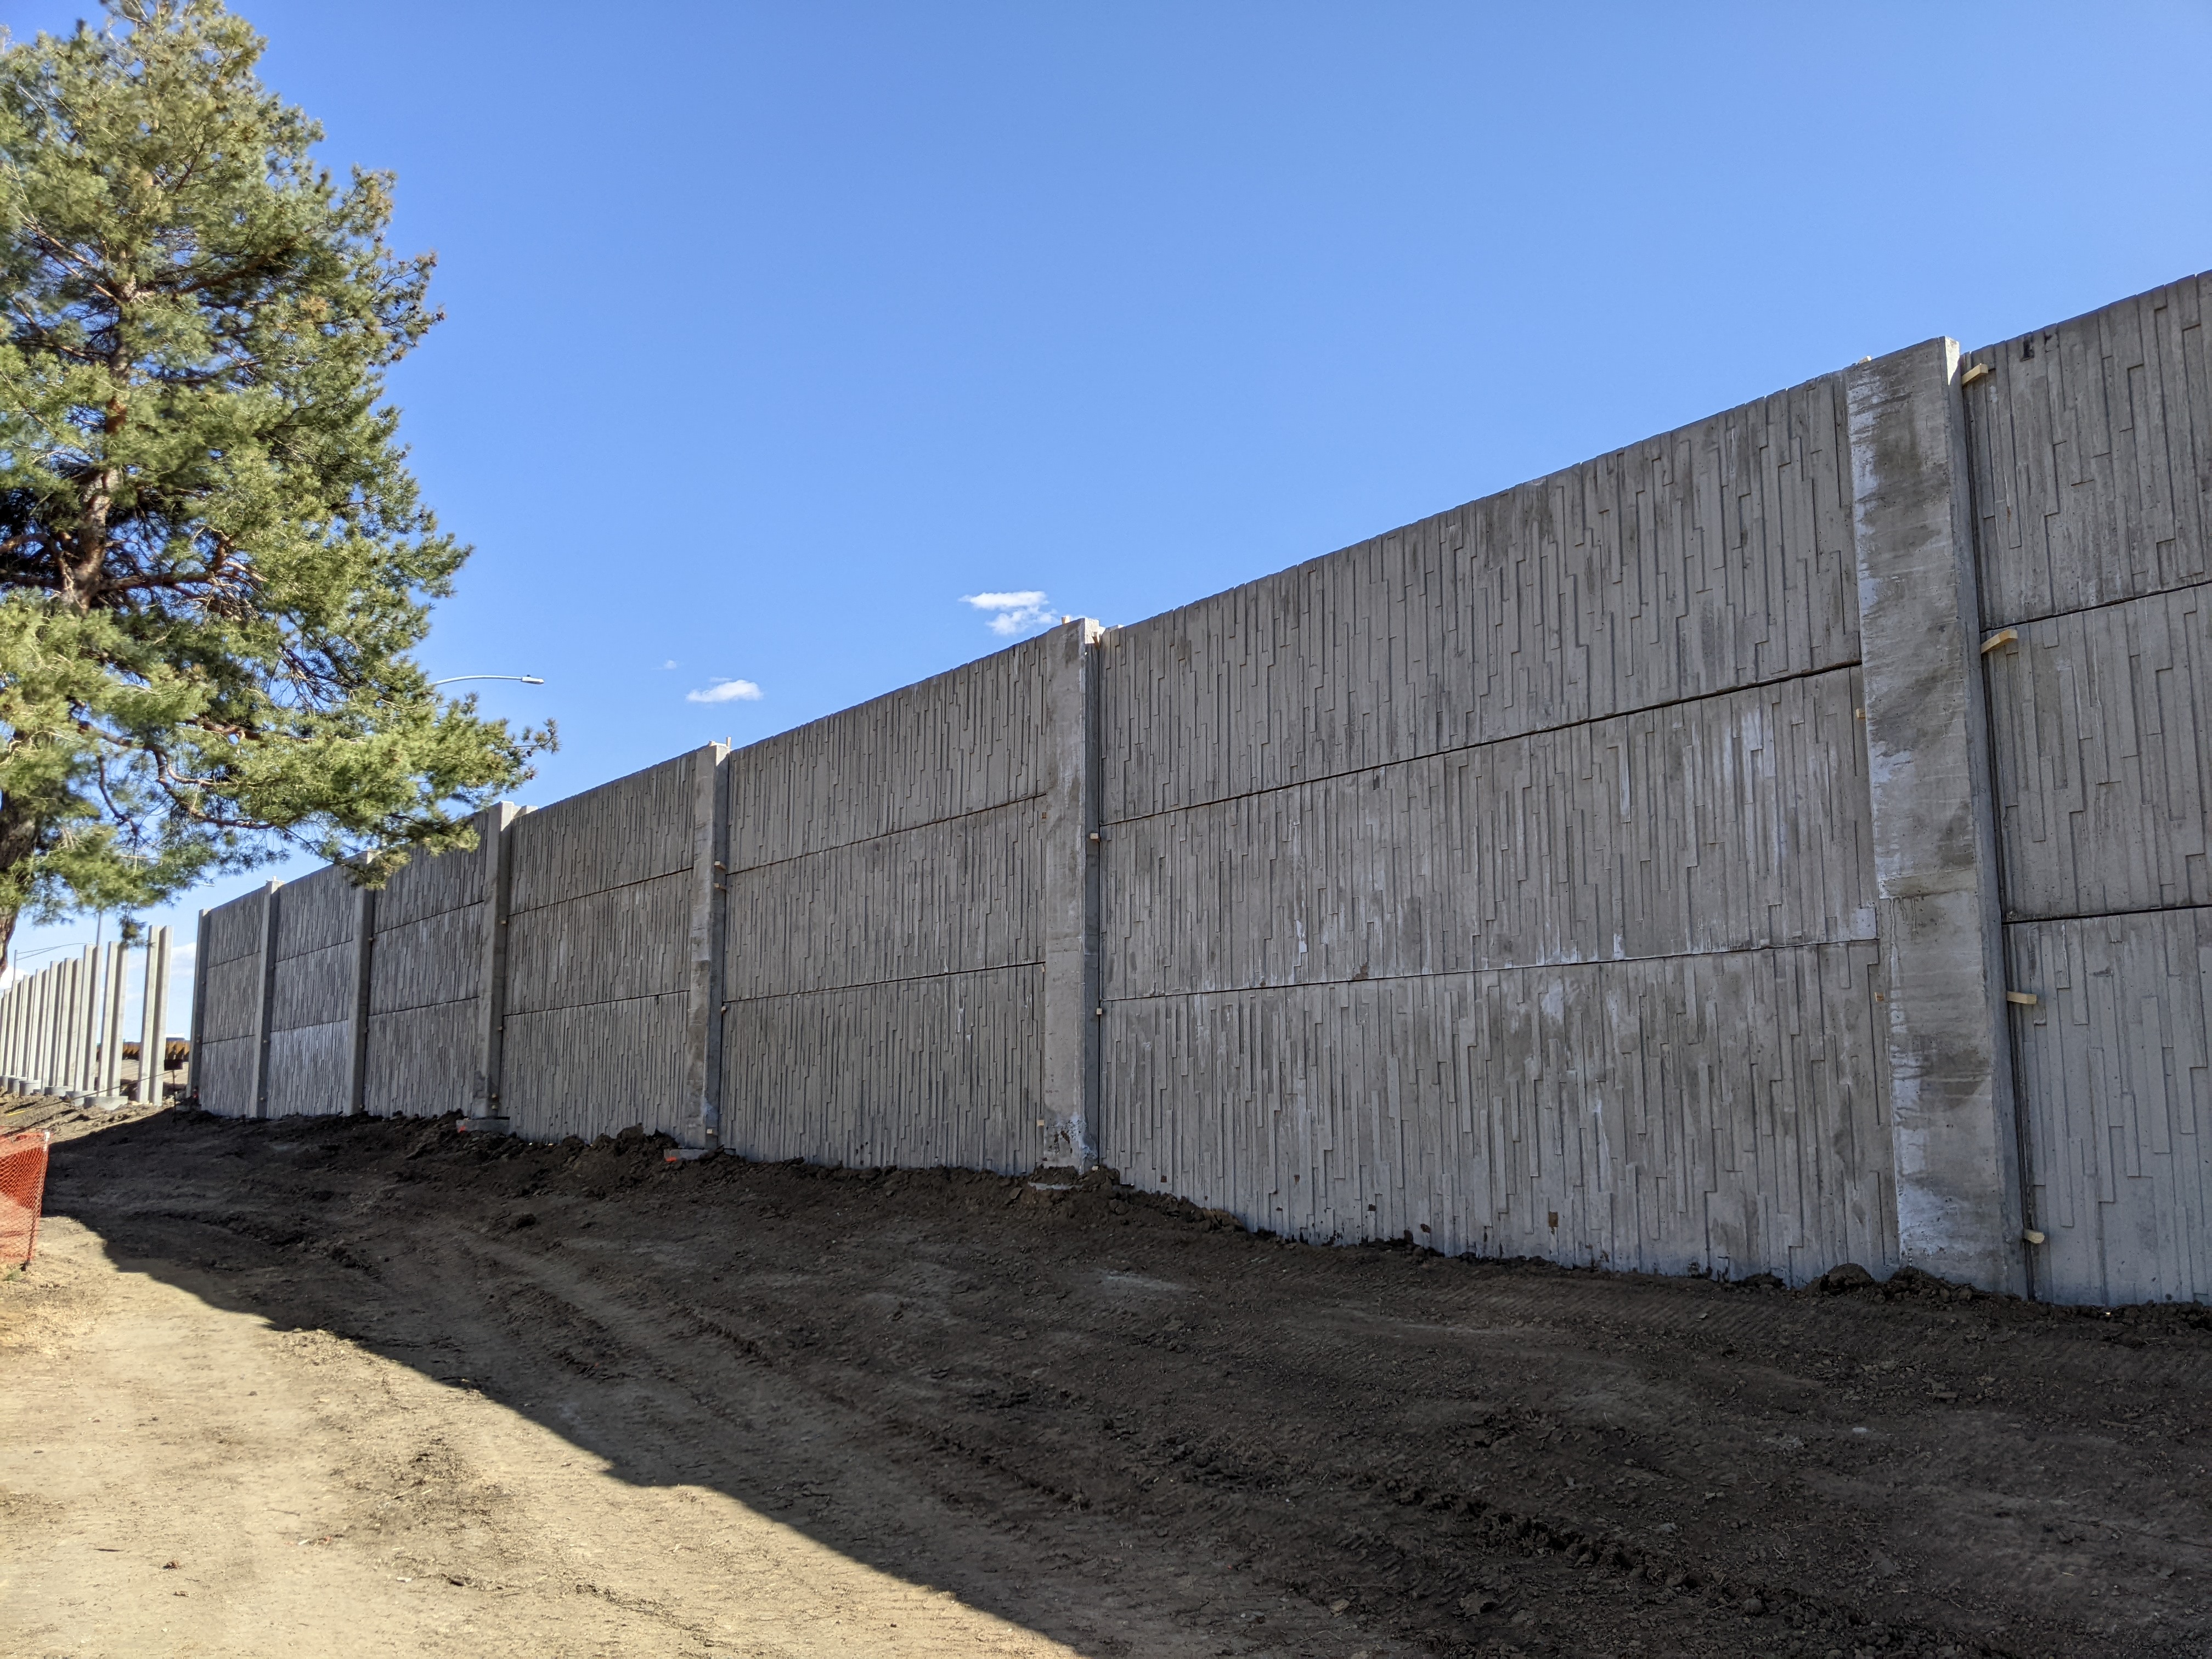 North Noise Wall March 2022.jpg detail image